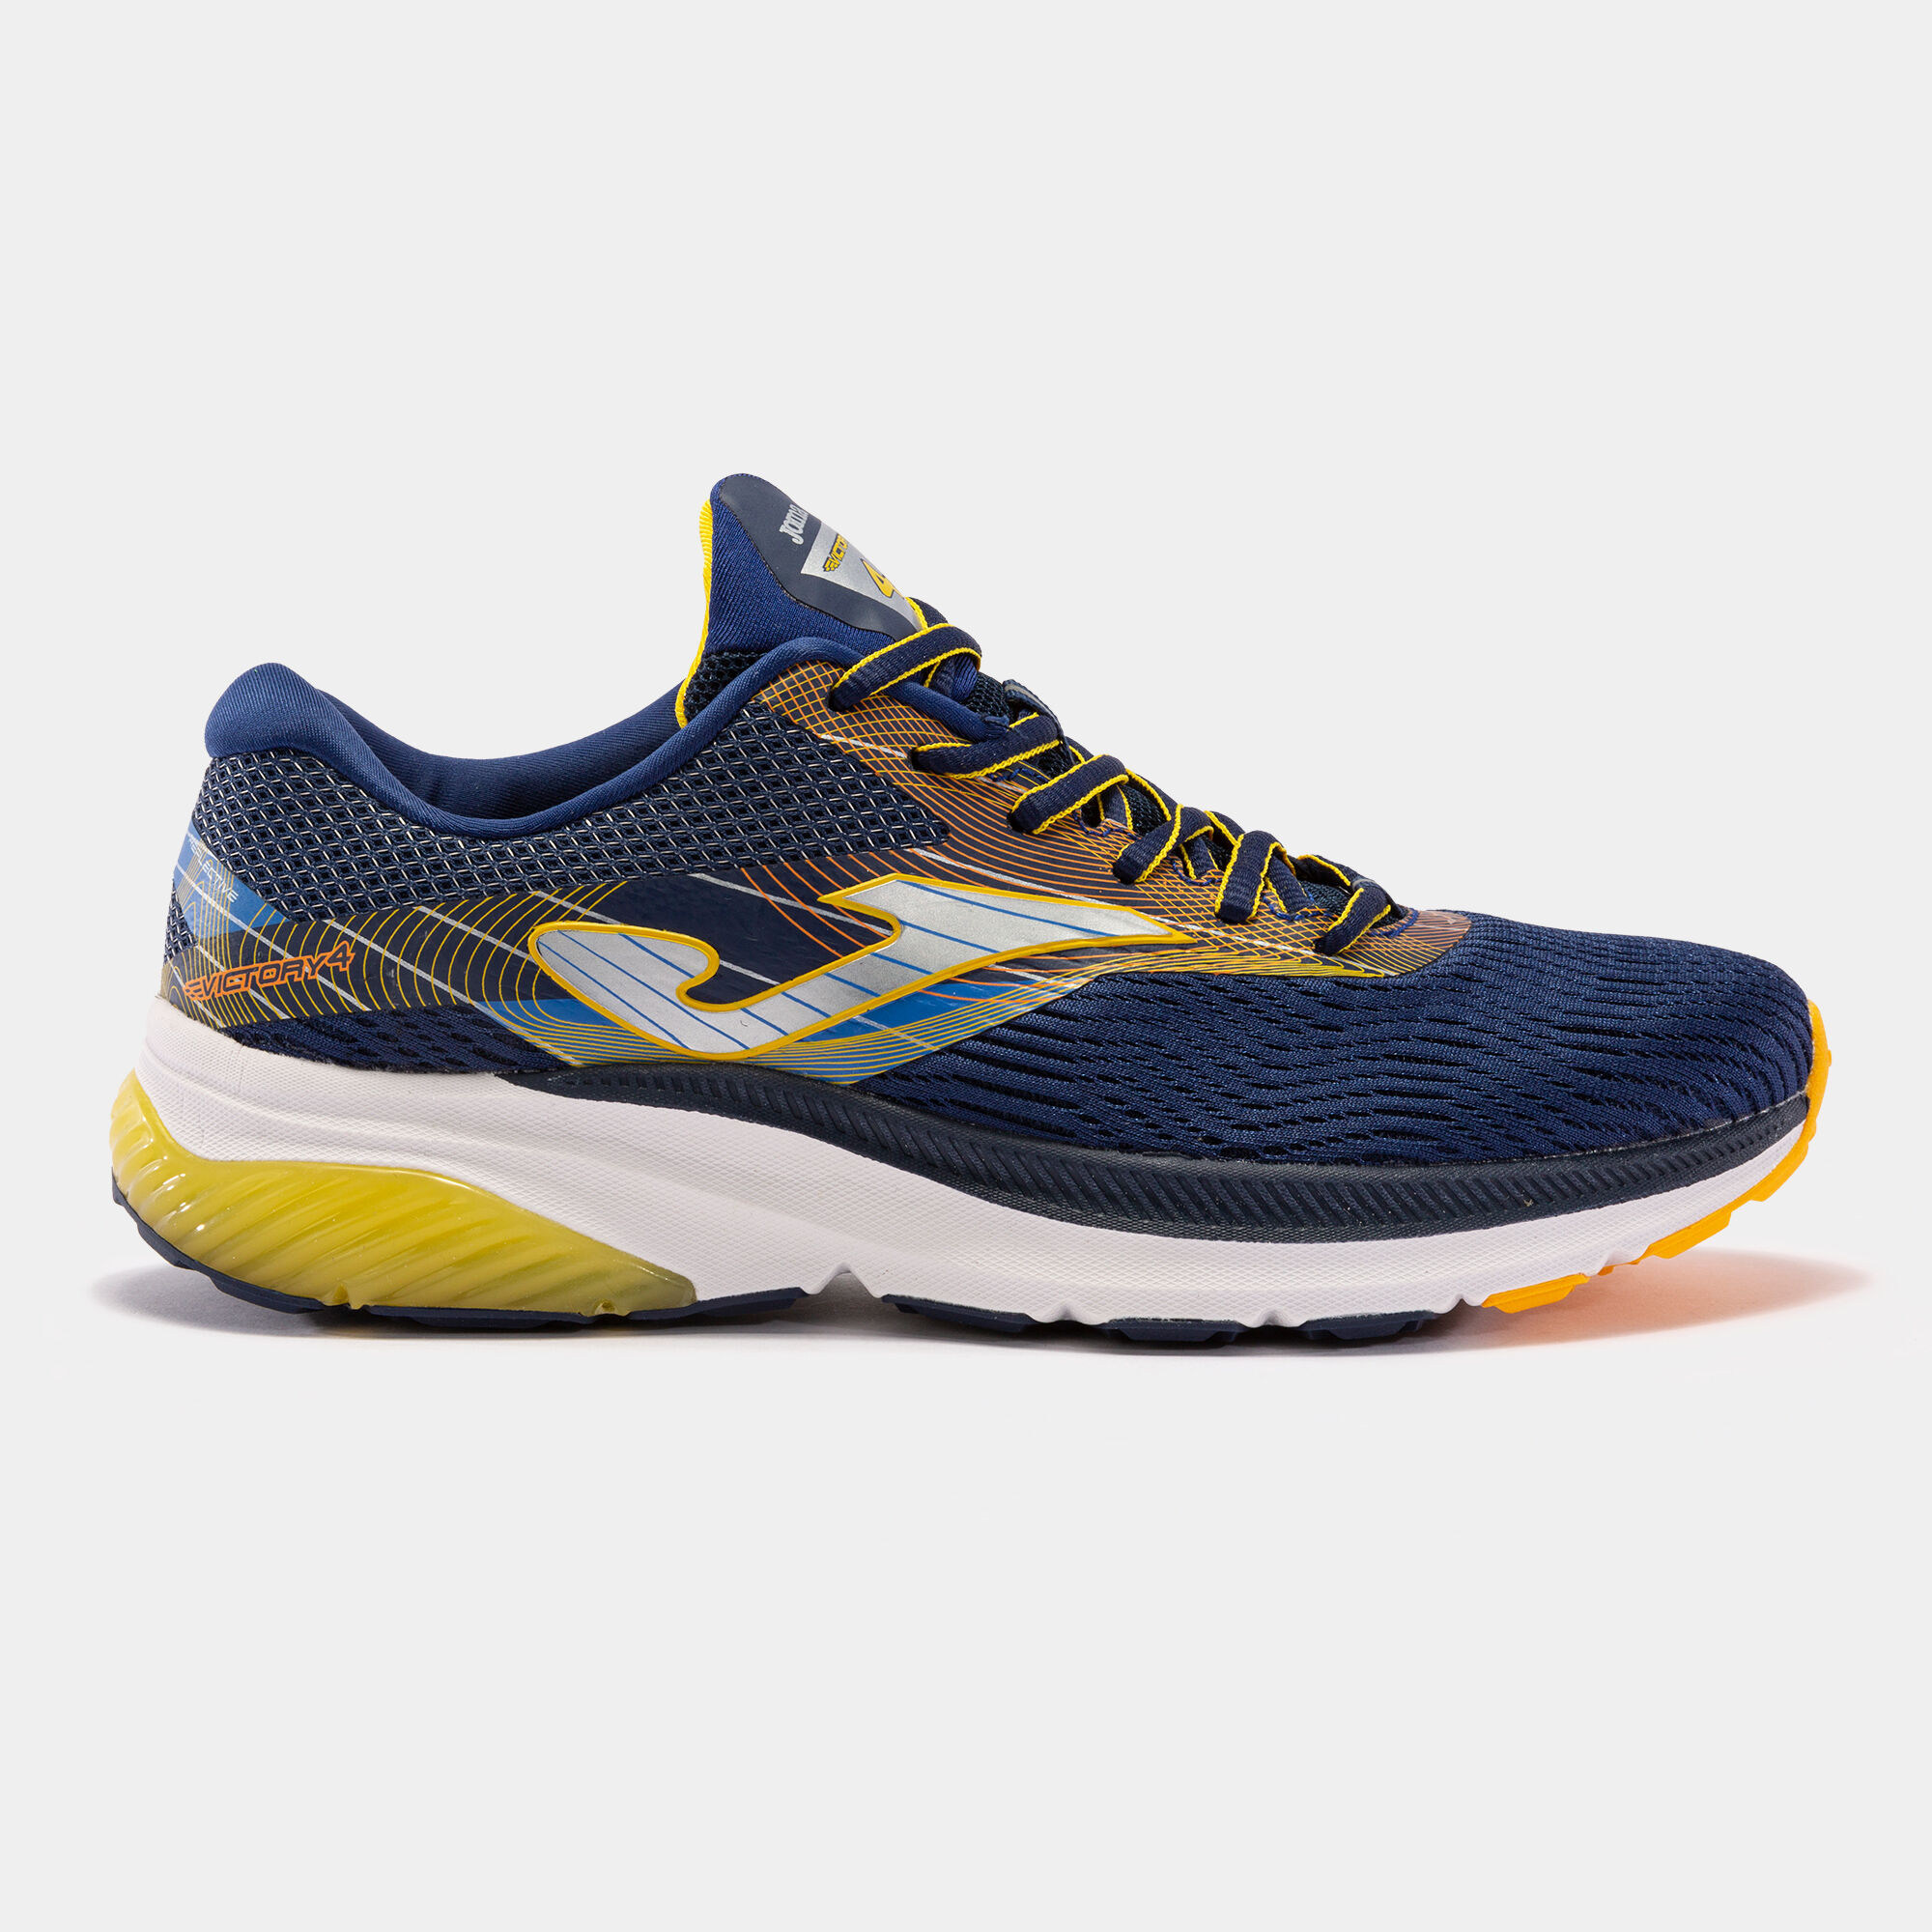 RUNNING SHOES VICTORY 22 MAN NAVY BLUE YELLOW